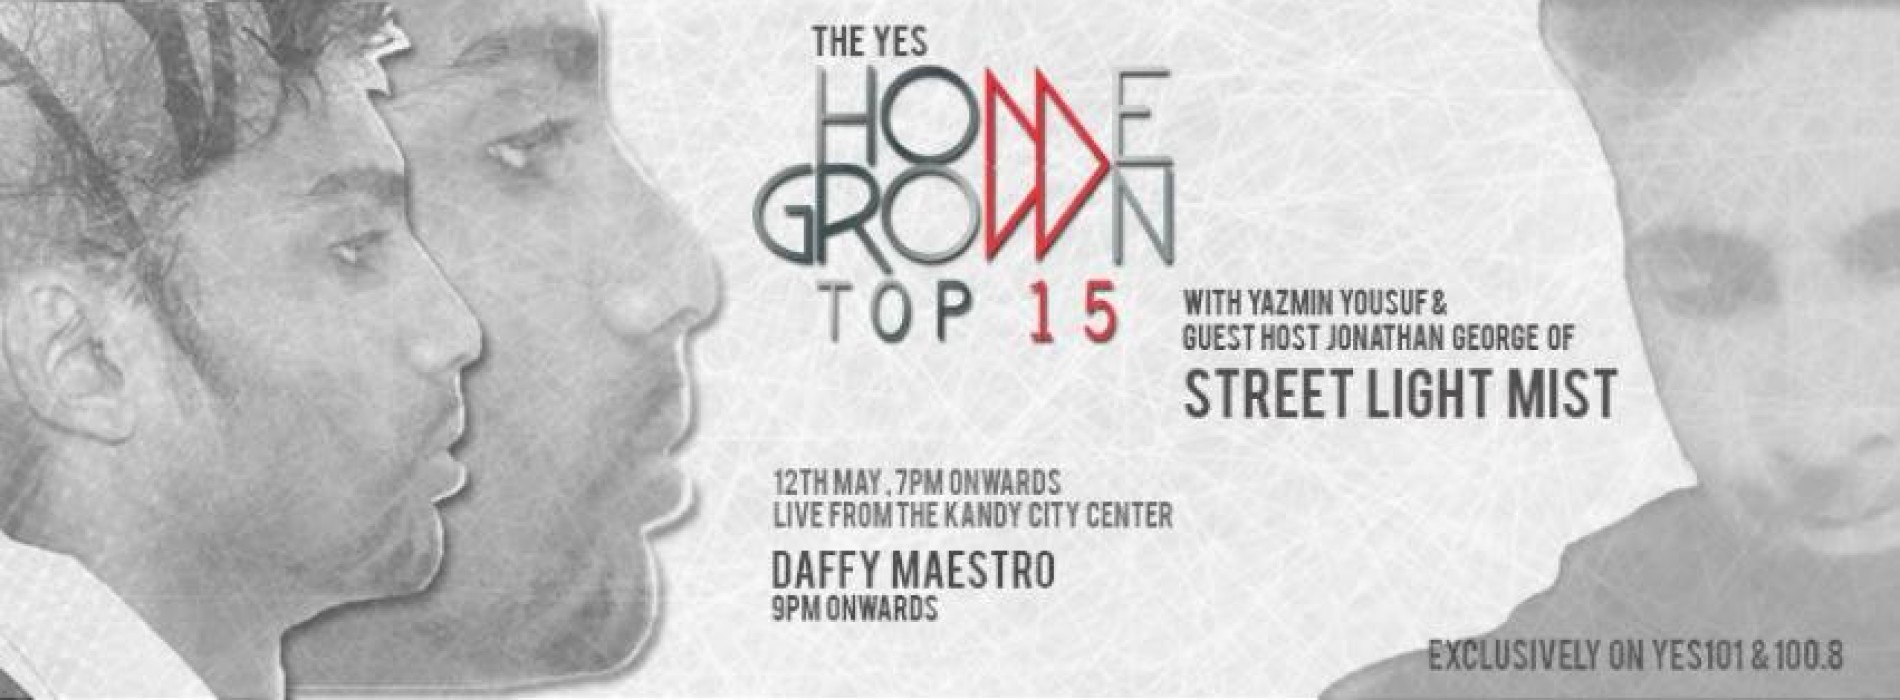 YES Home Grown Top 15 Live From The Kandy City Center